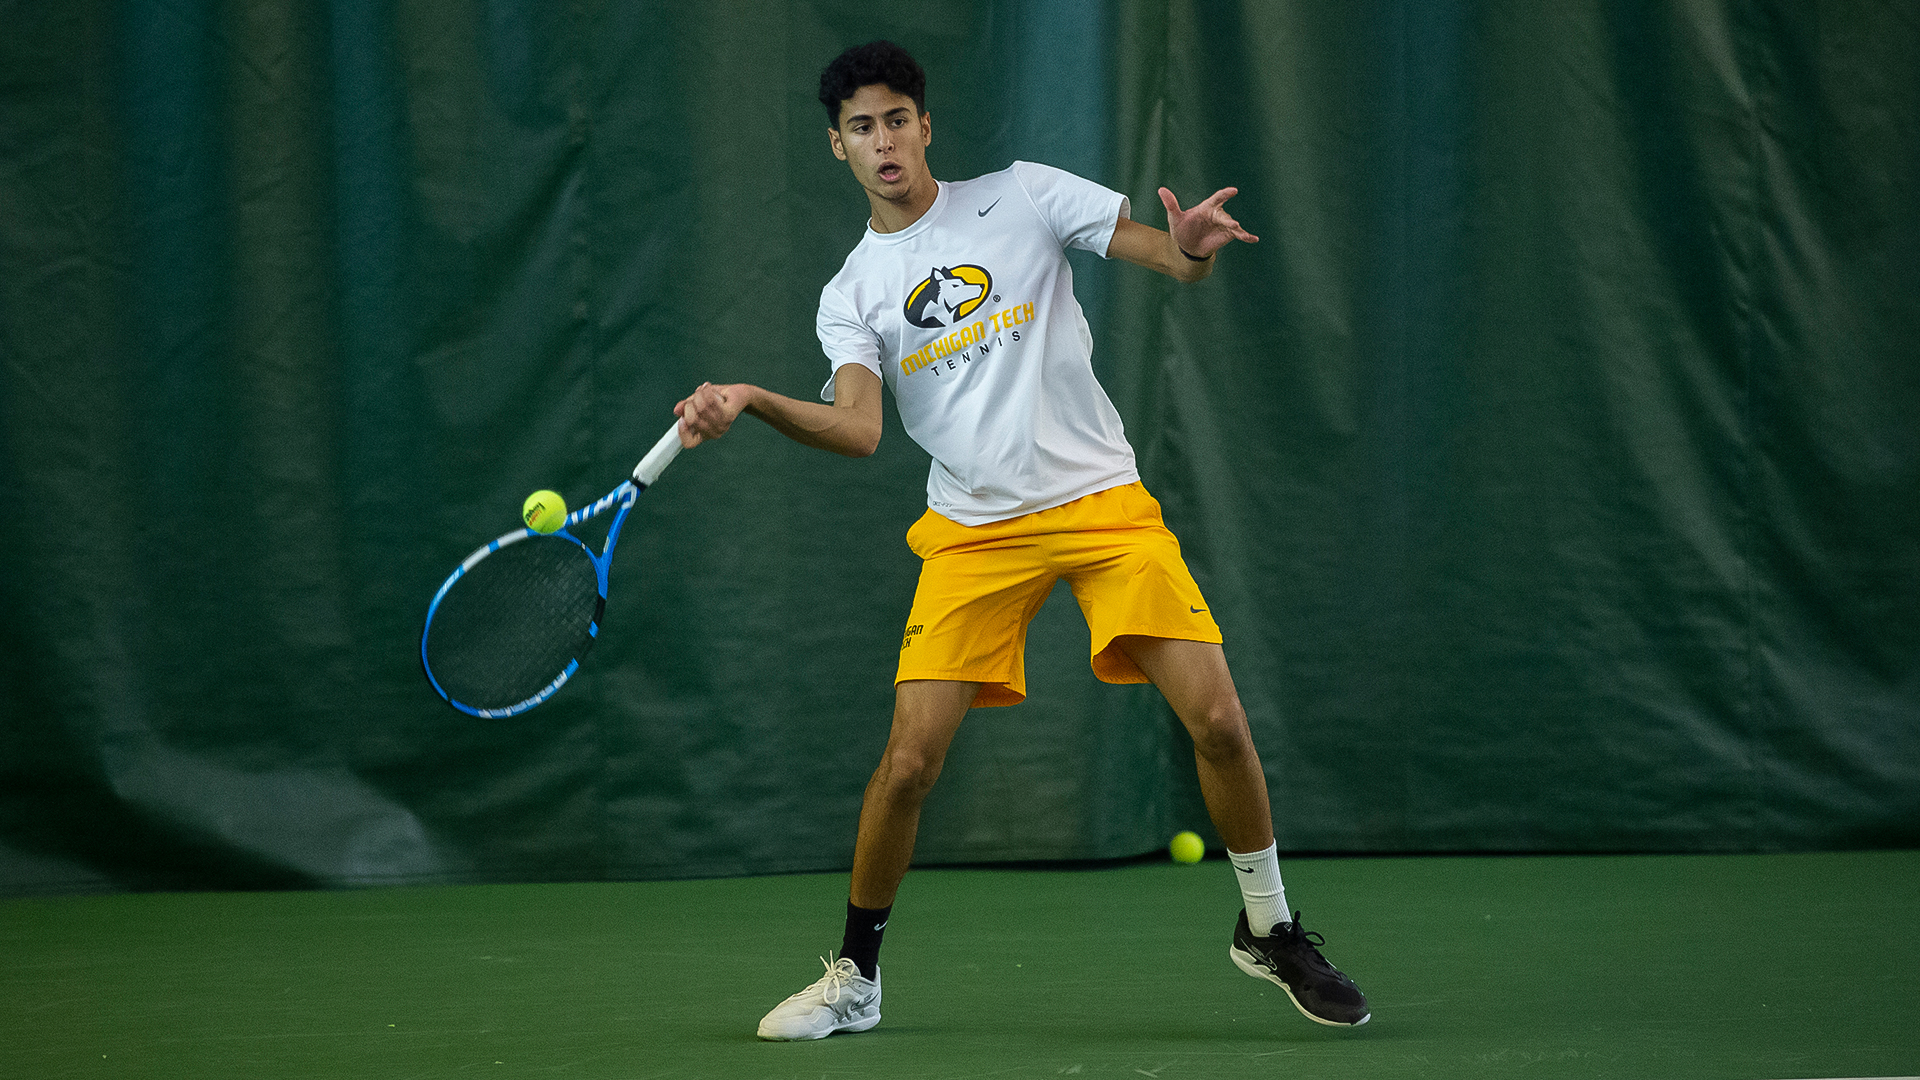 Men’s Tennis claims victory over Northwood Friday